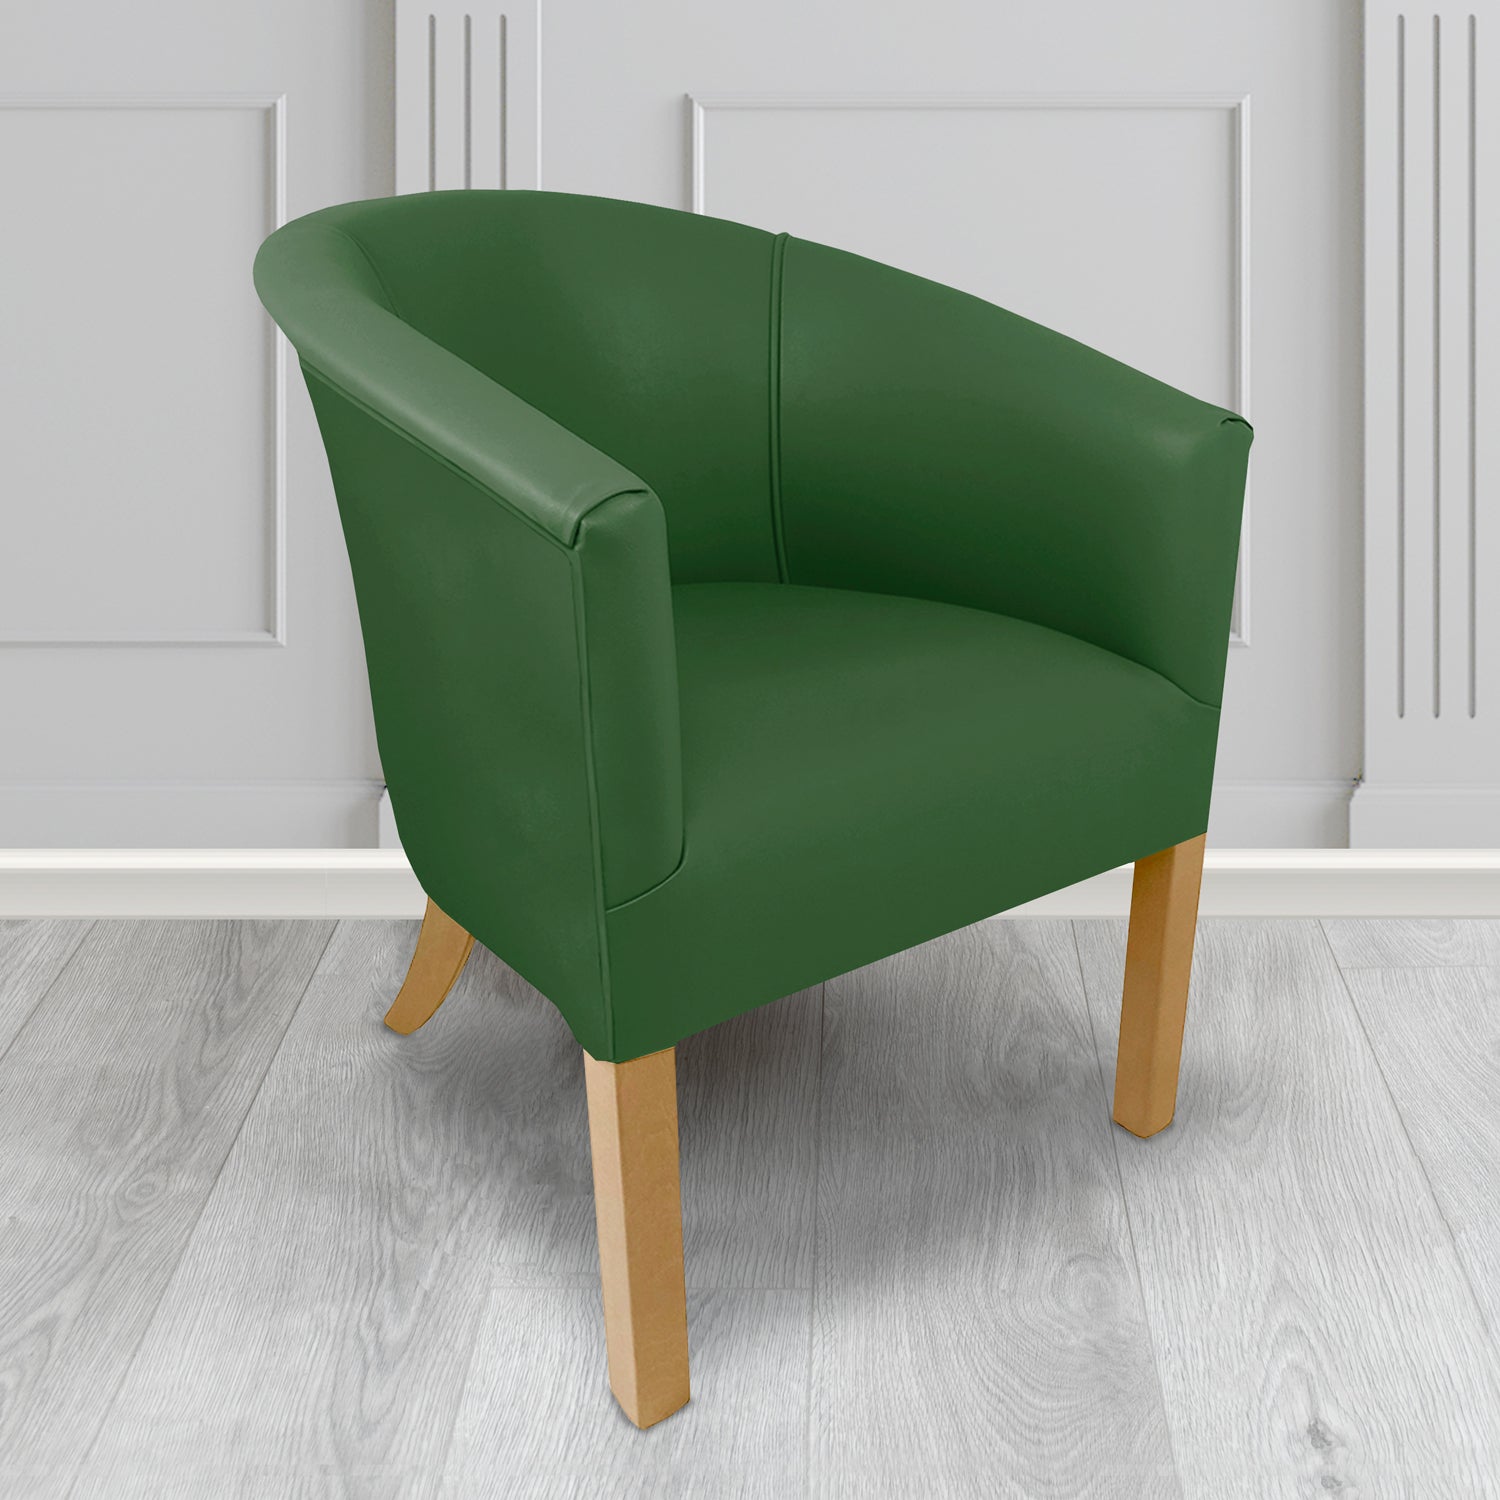 Lewisham Tub Chair in Agua Paint Pot Grass Crib 5 Faux Leather - Antimicrobial, Stain Resistant & Waterproof - The Tub Chair Shop